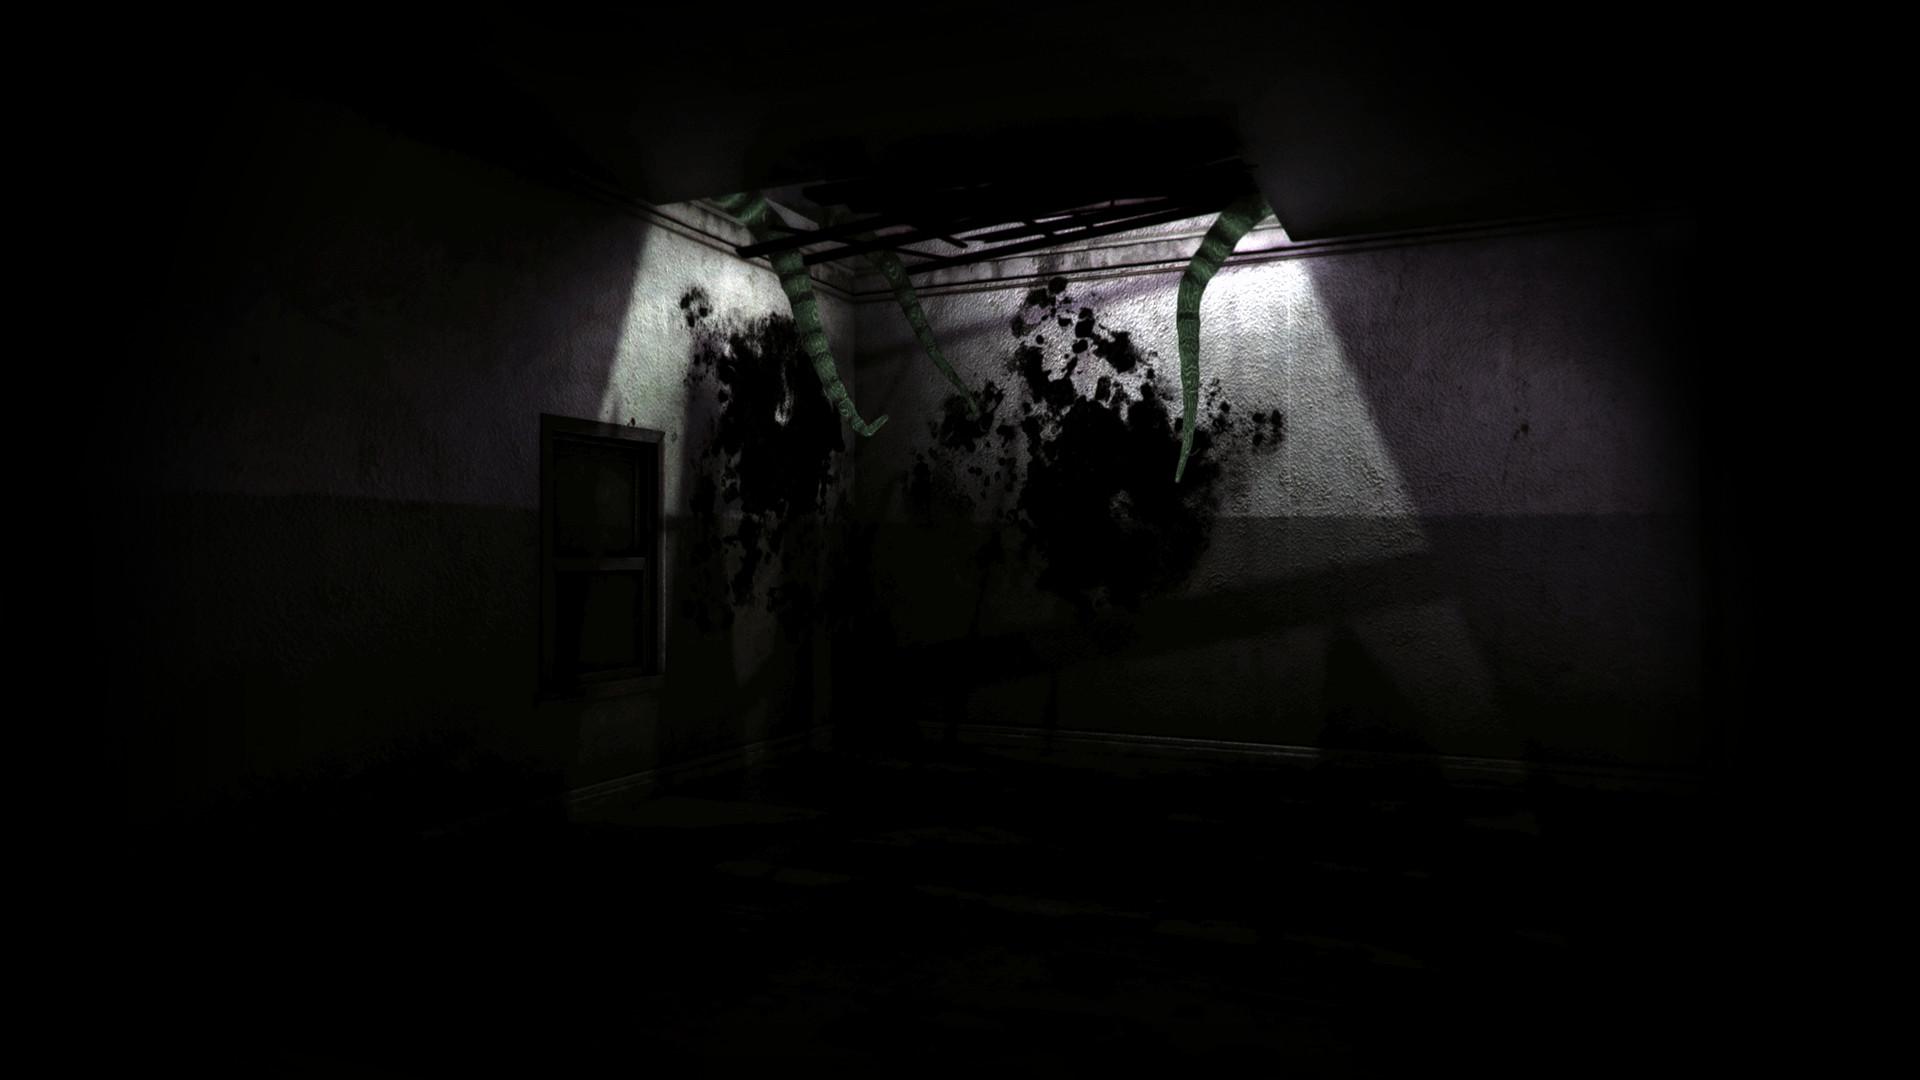 Screenshot №3 from game Insane Decay of Mind: The Labyrinth